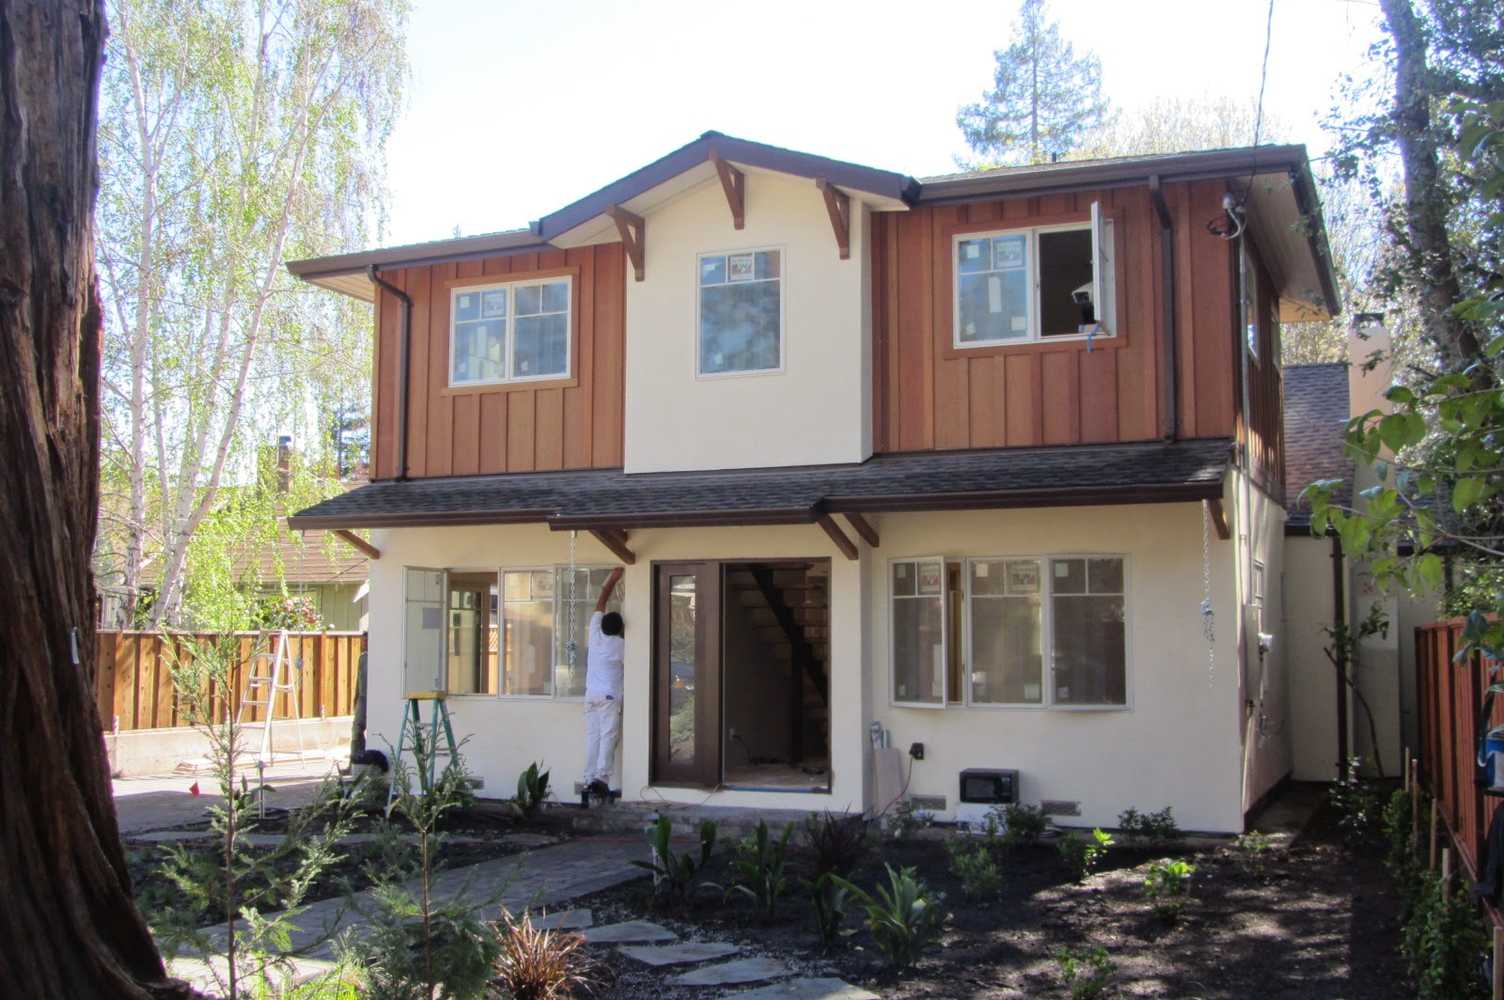 Project photos from Palo Alto Home Improvements Inc